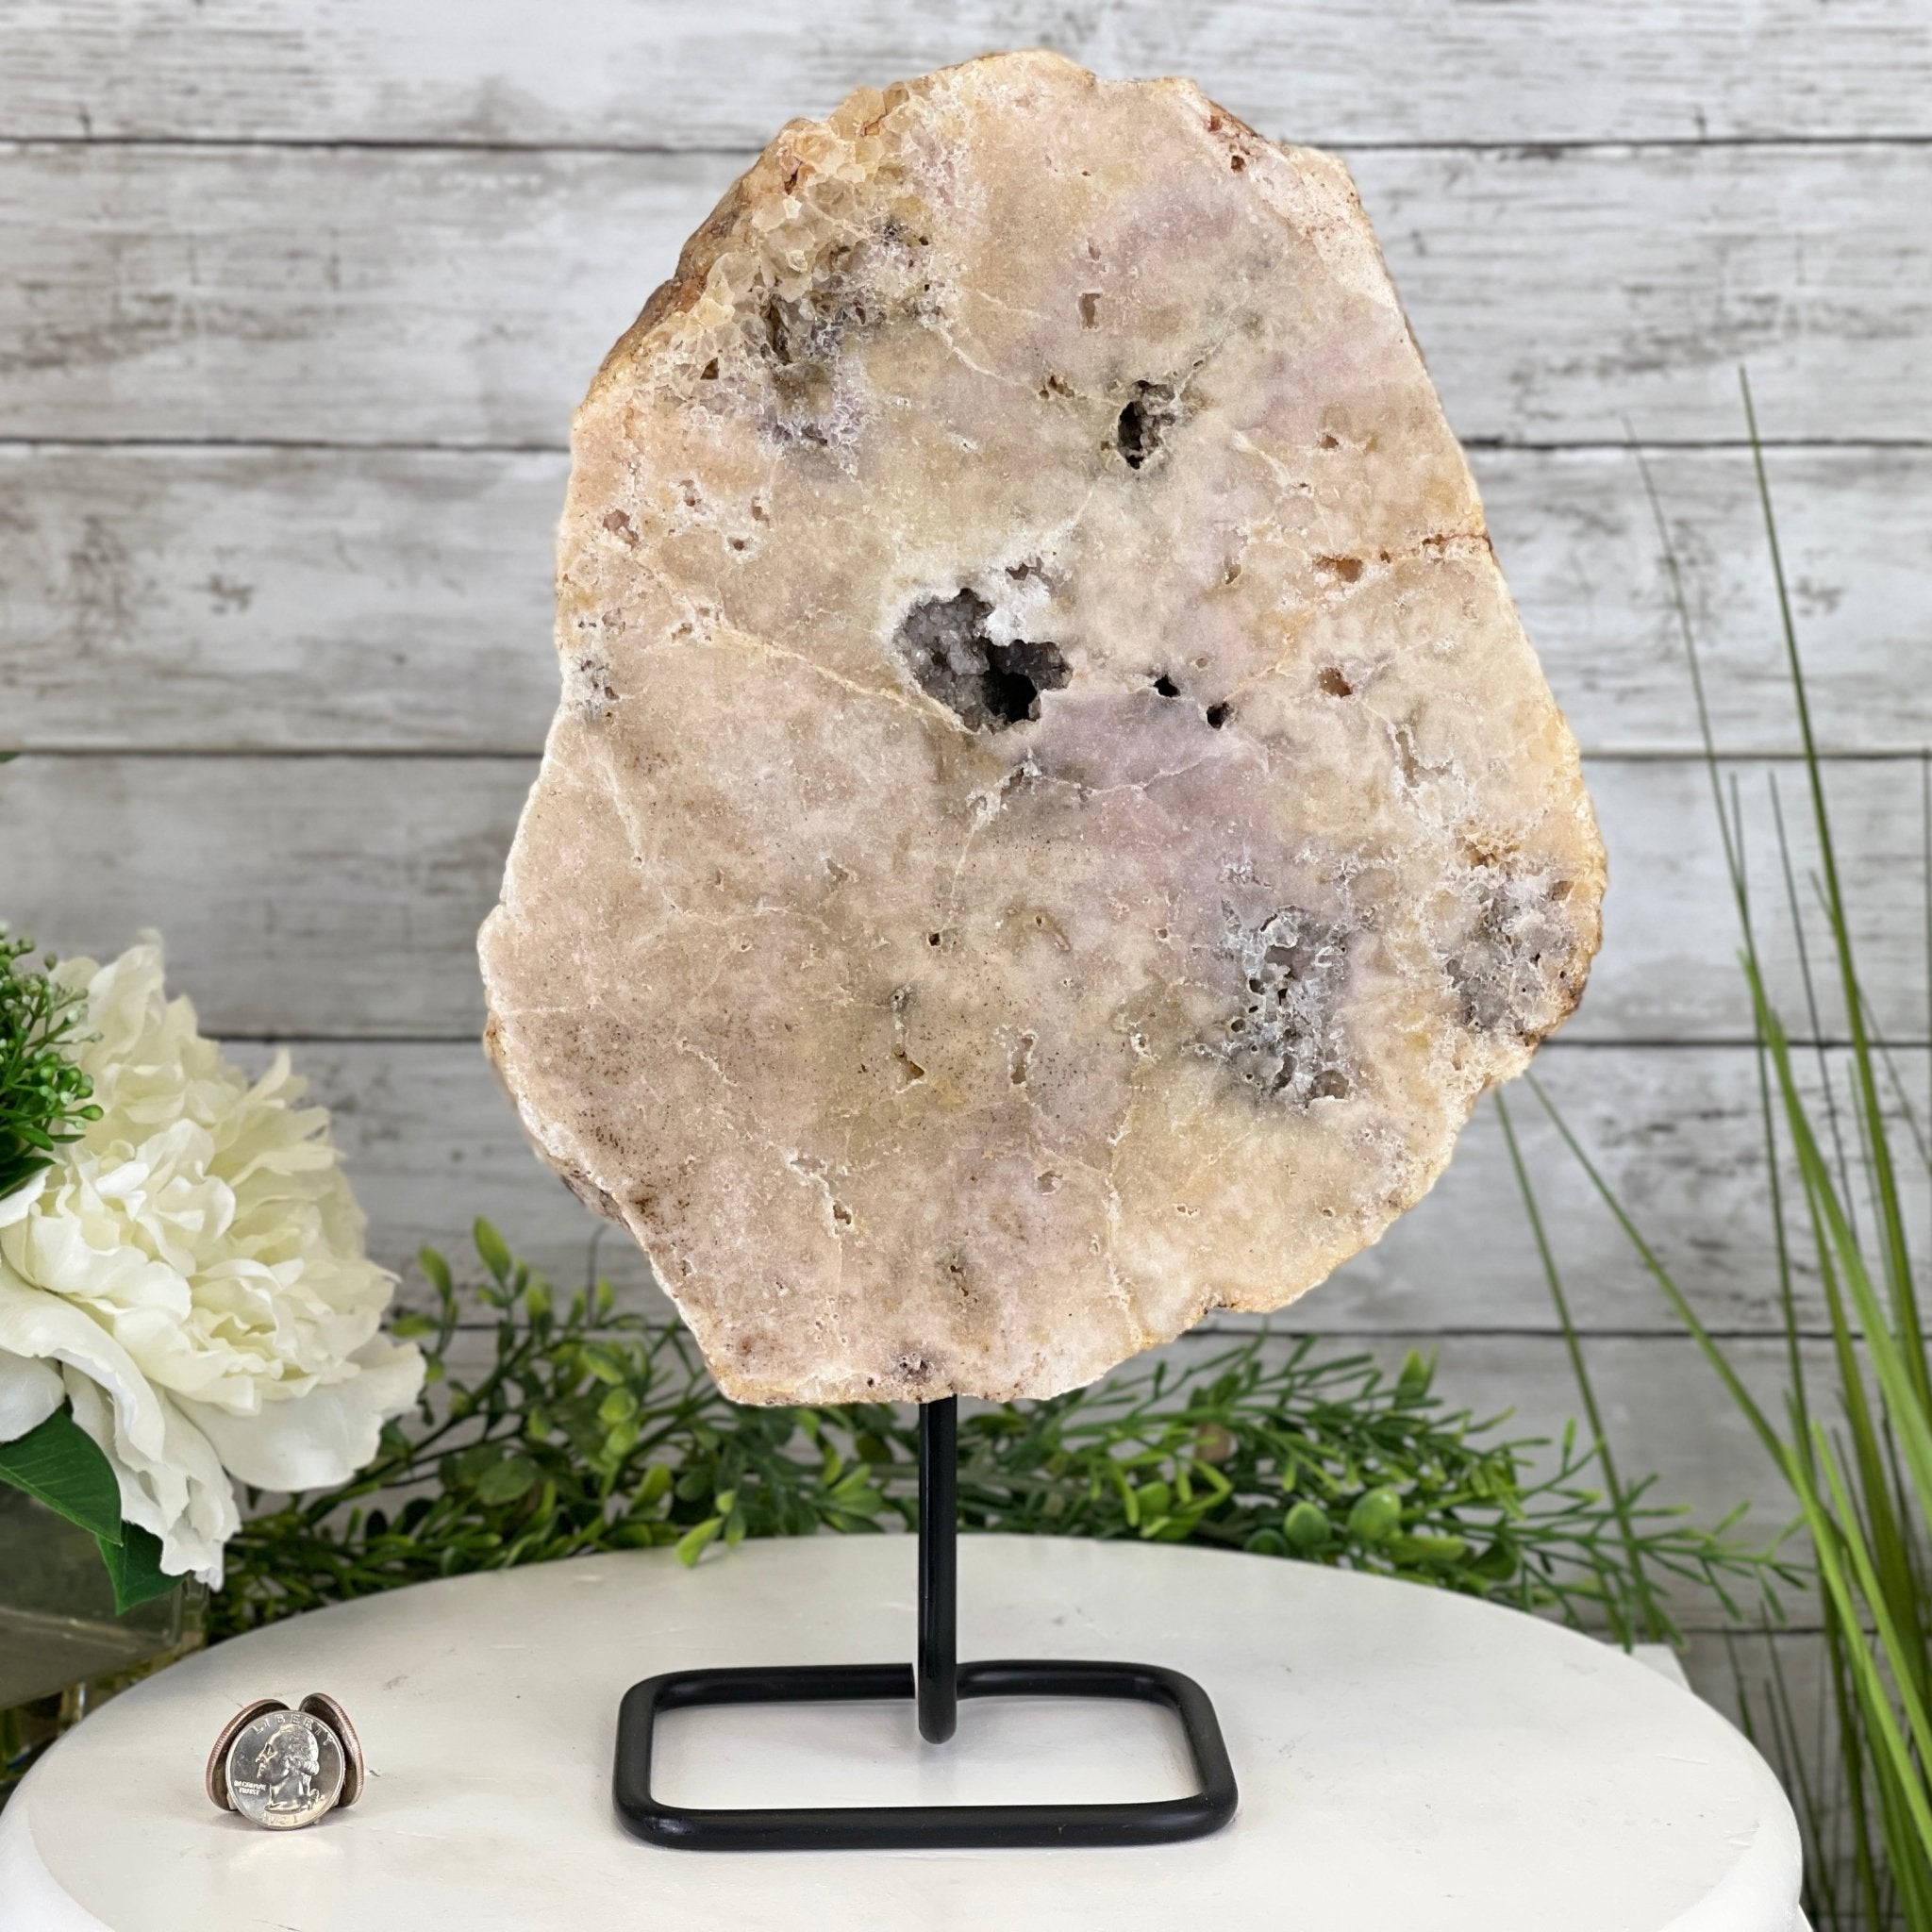 Pink Amethyst Slice on a Stand, 9.3 lbs and 14.2" Tall #5742-0029 by Brazil Gems - Brazil GemsBrazil GemsPink Amethyst Slice on a Stand, 9.3 lbs and 14.2" Tall #5742-0029 by Brazil GemsSlices on Fixed Bases5742-0029